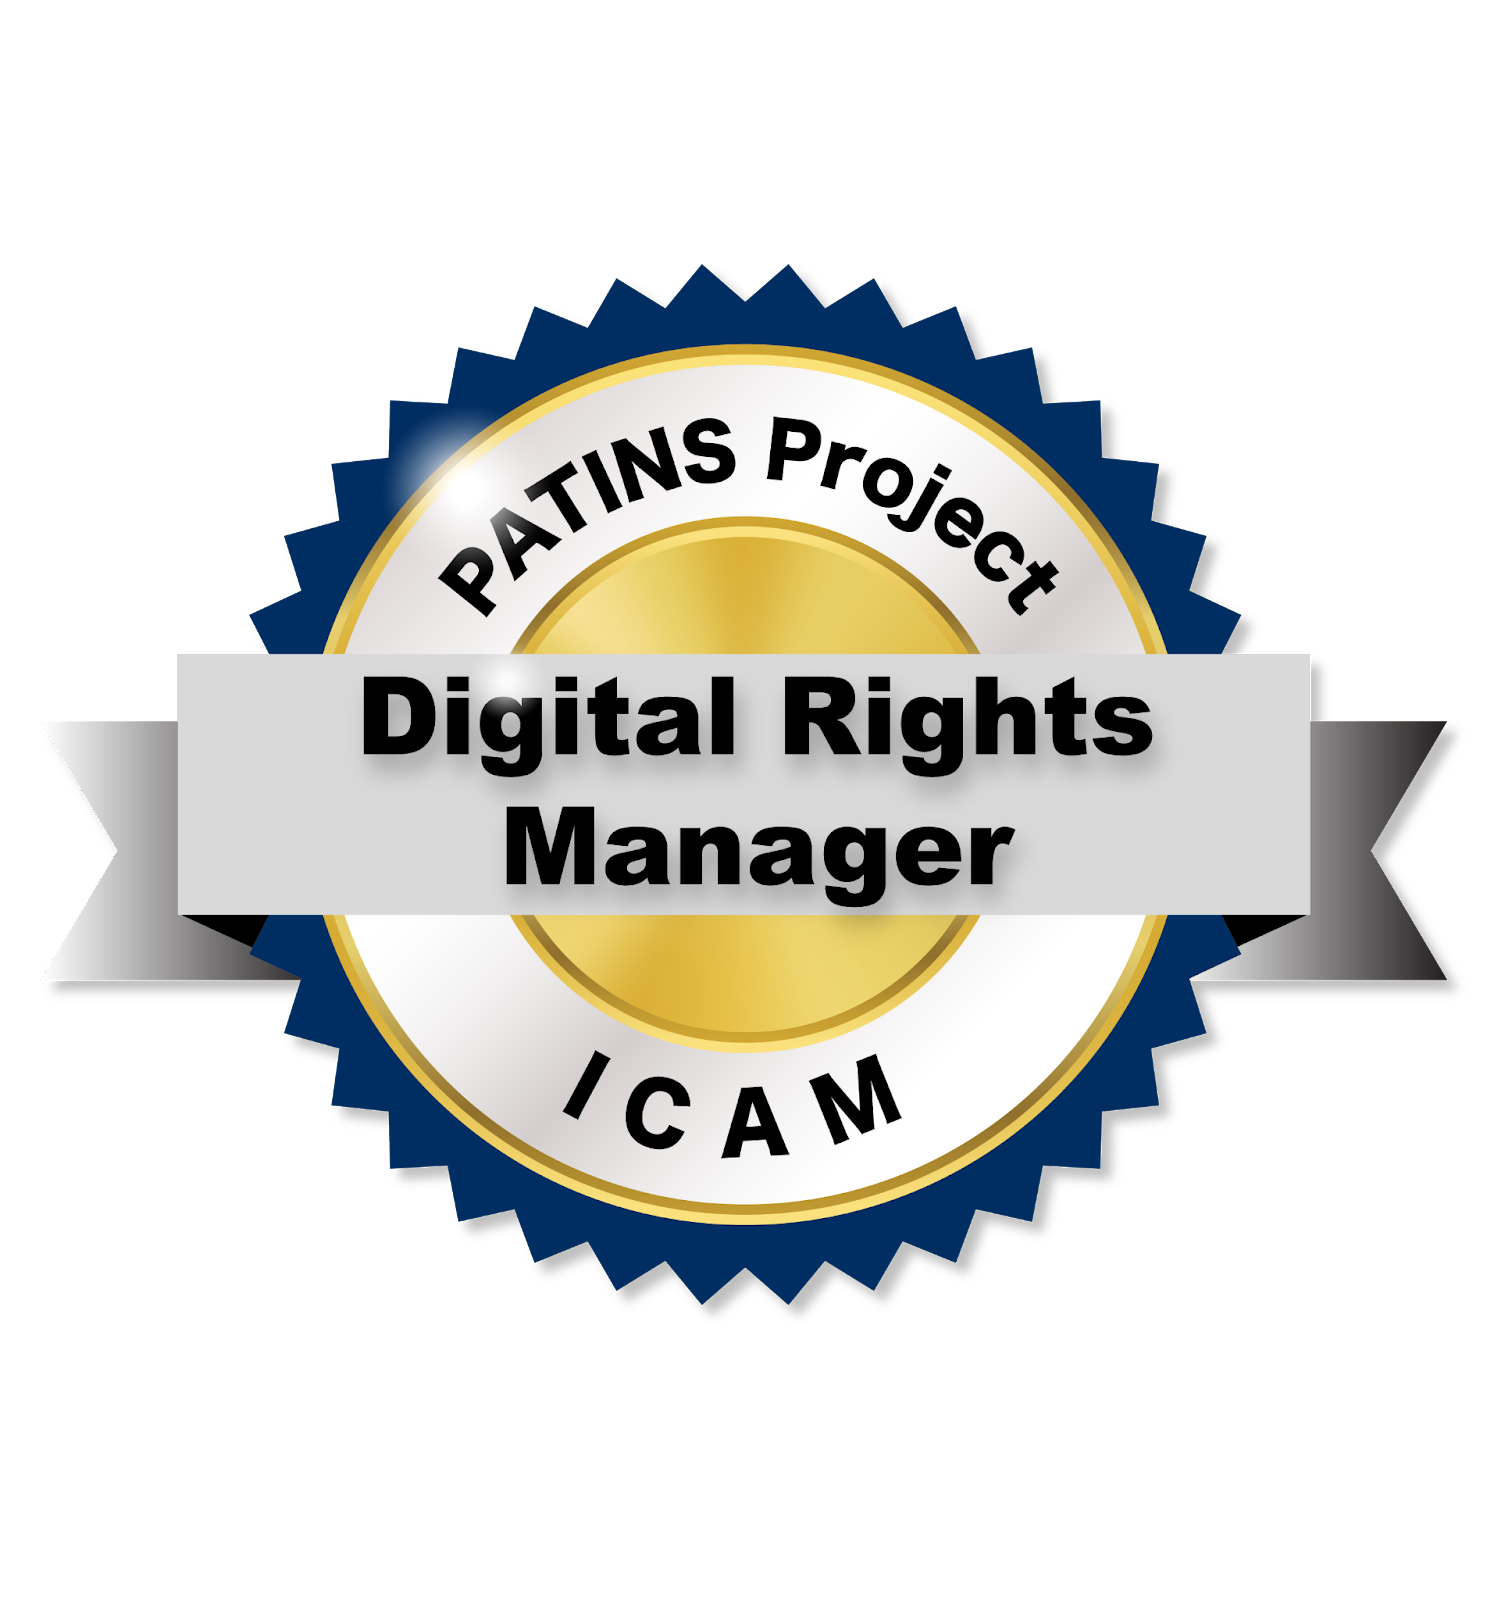 PATINS Project/ICAM Digital Rights Manager Badge